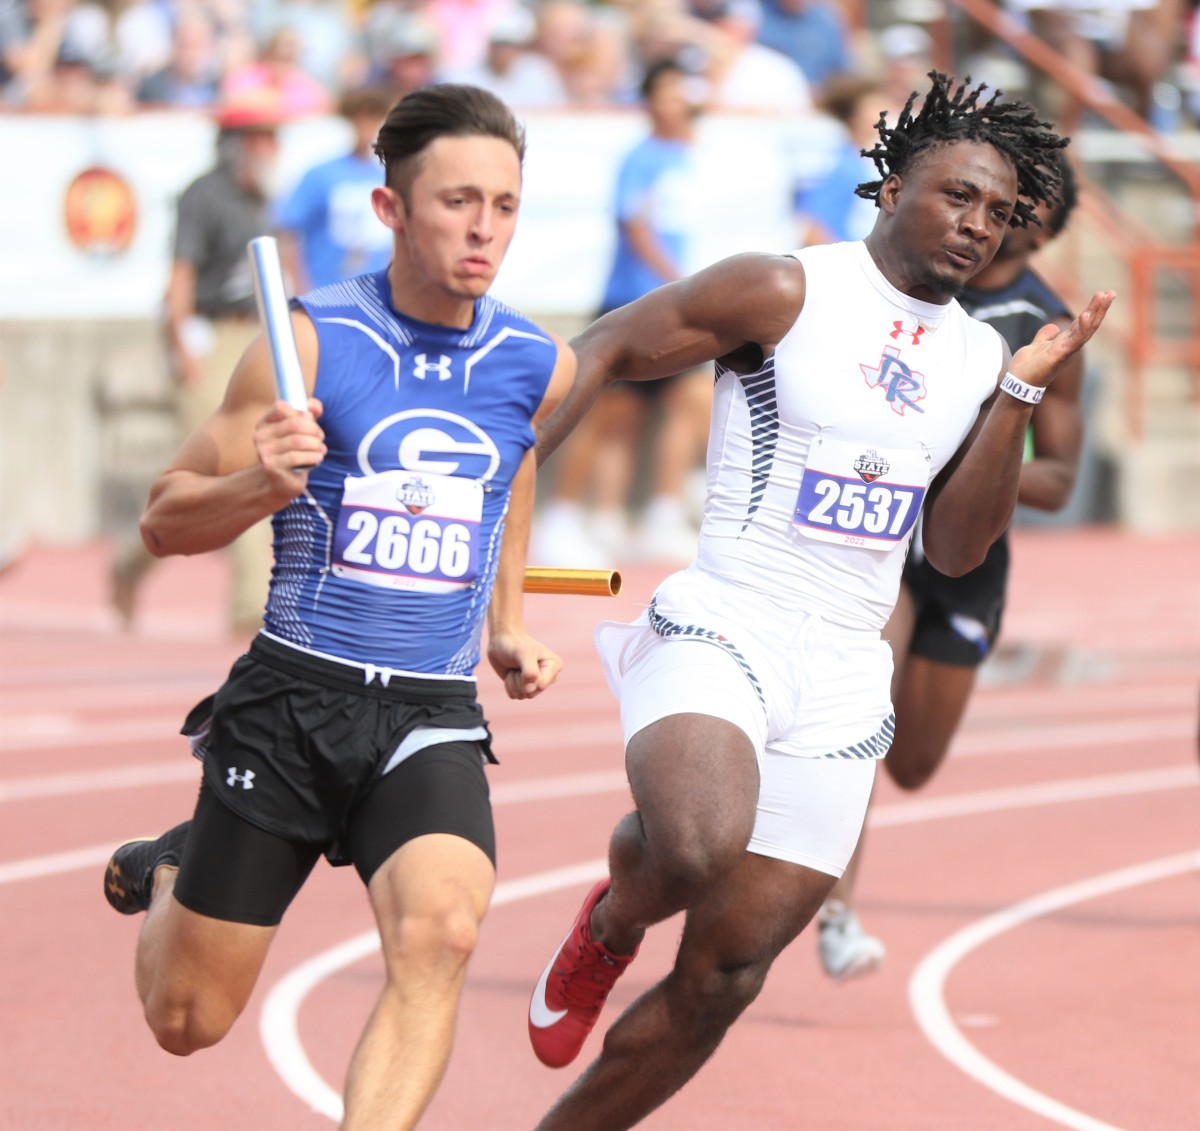 uil texas state track and field meet championships 2A 5A austin20